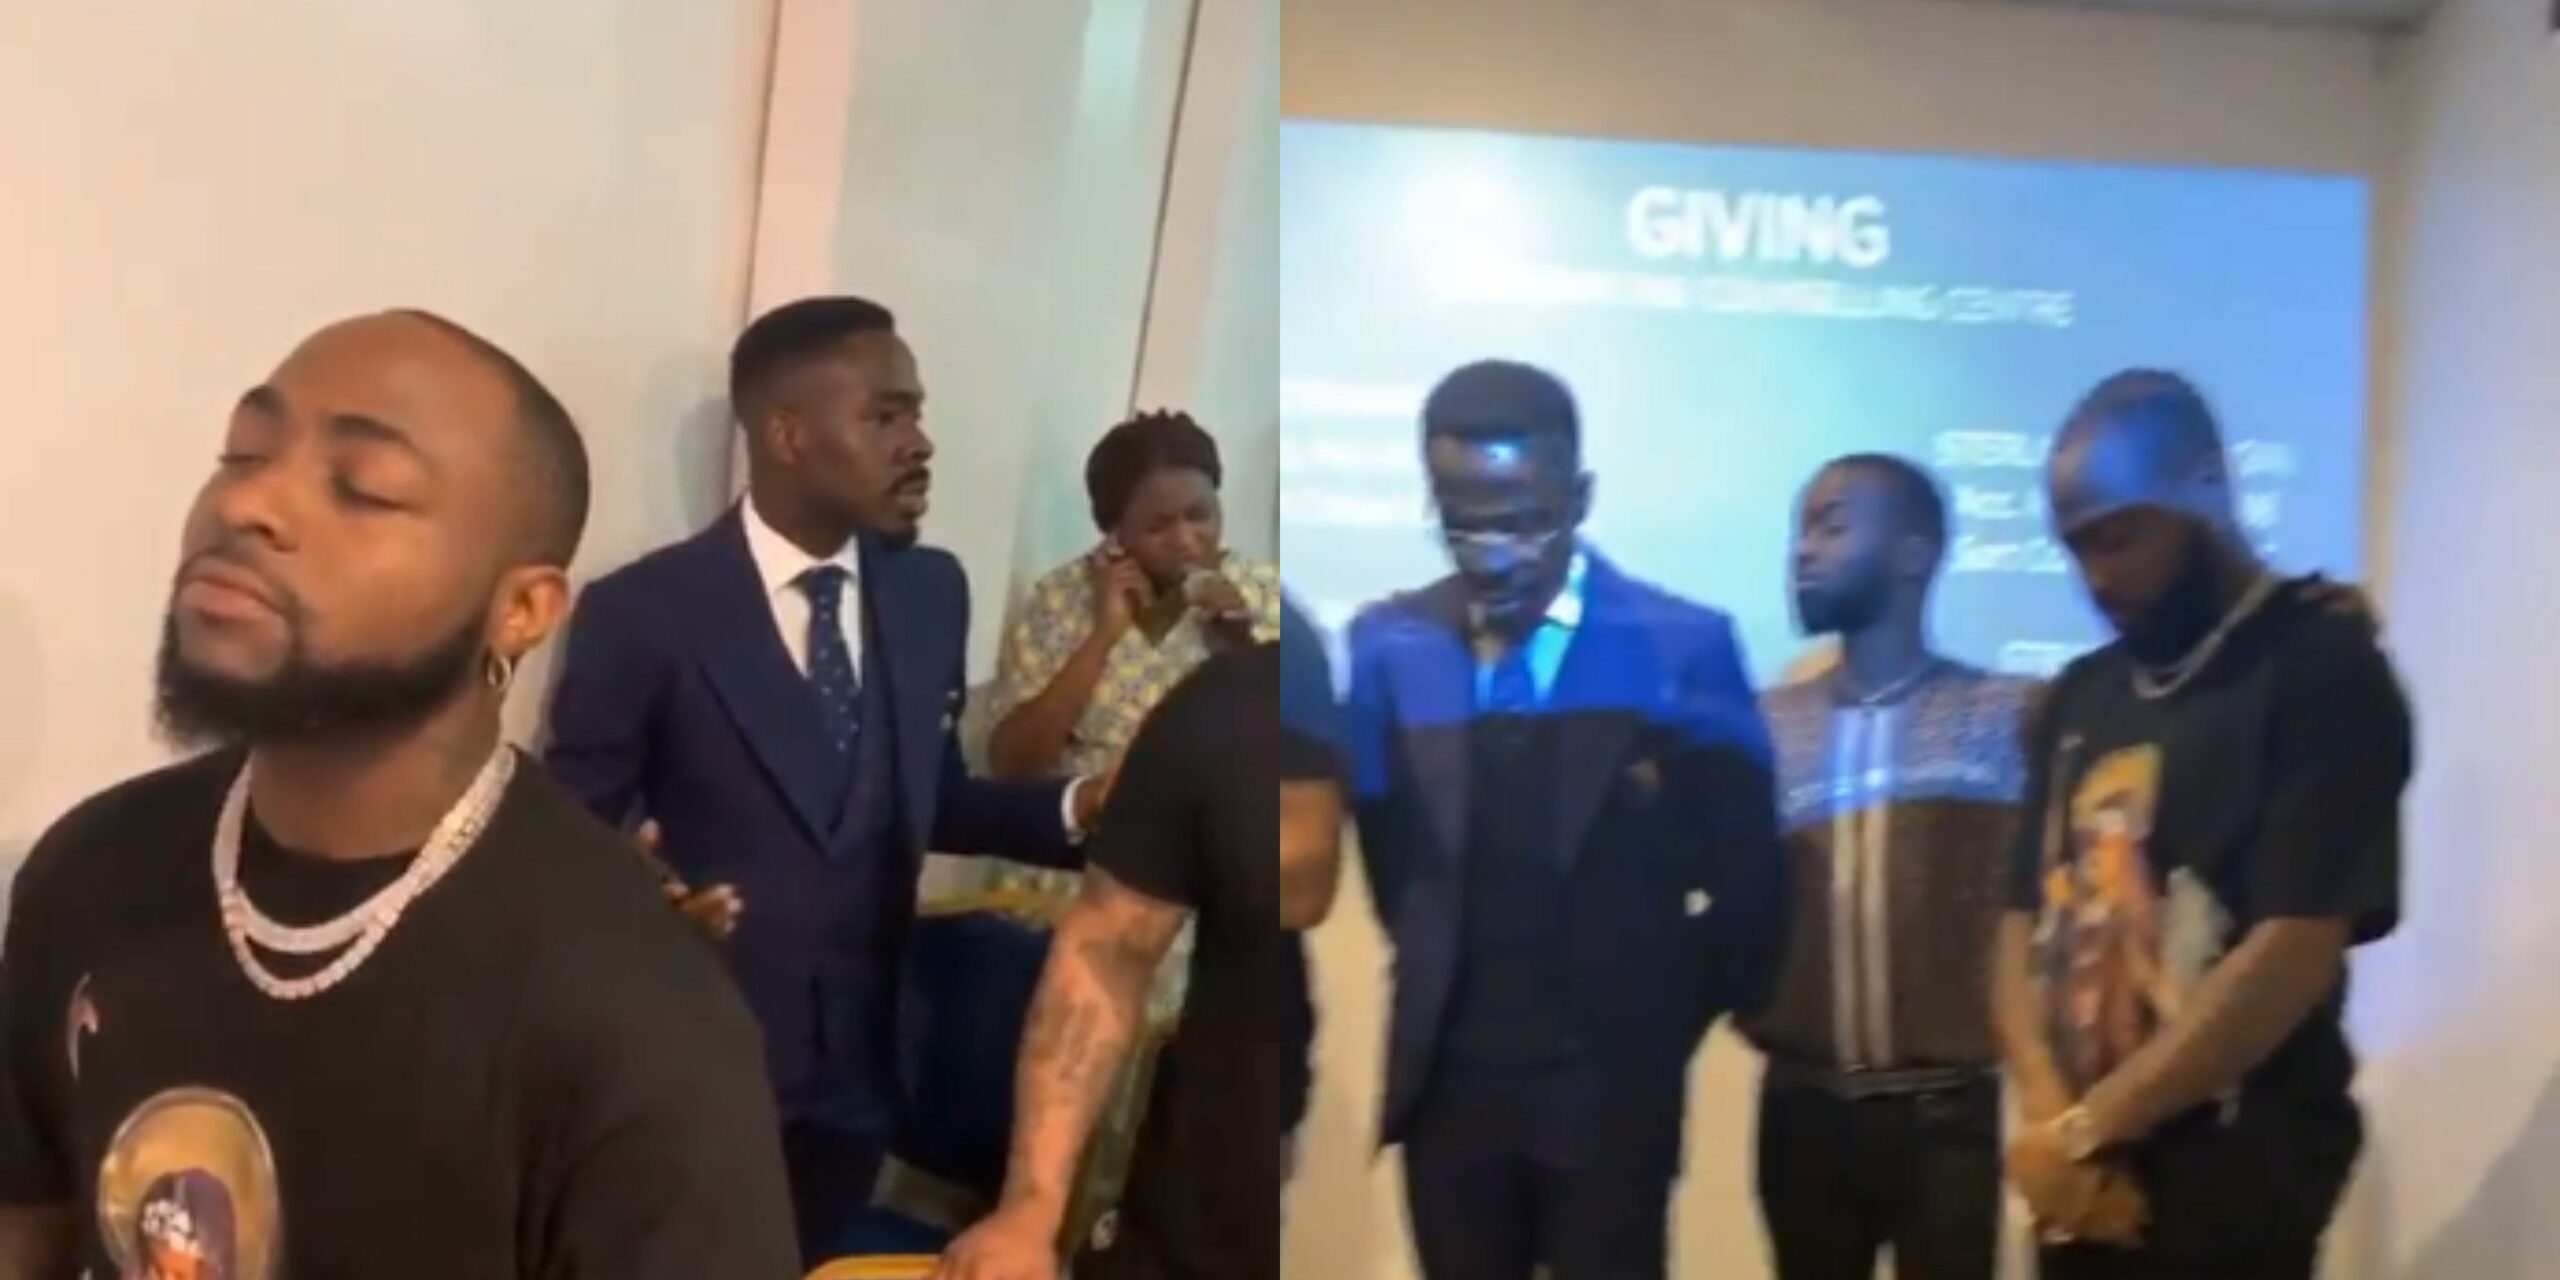 Davido's sister, Sharon drags him to church - Watch the moment pastor called him out for special prayers (Video)